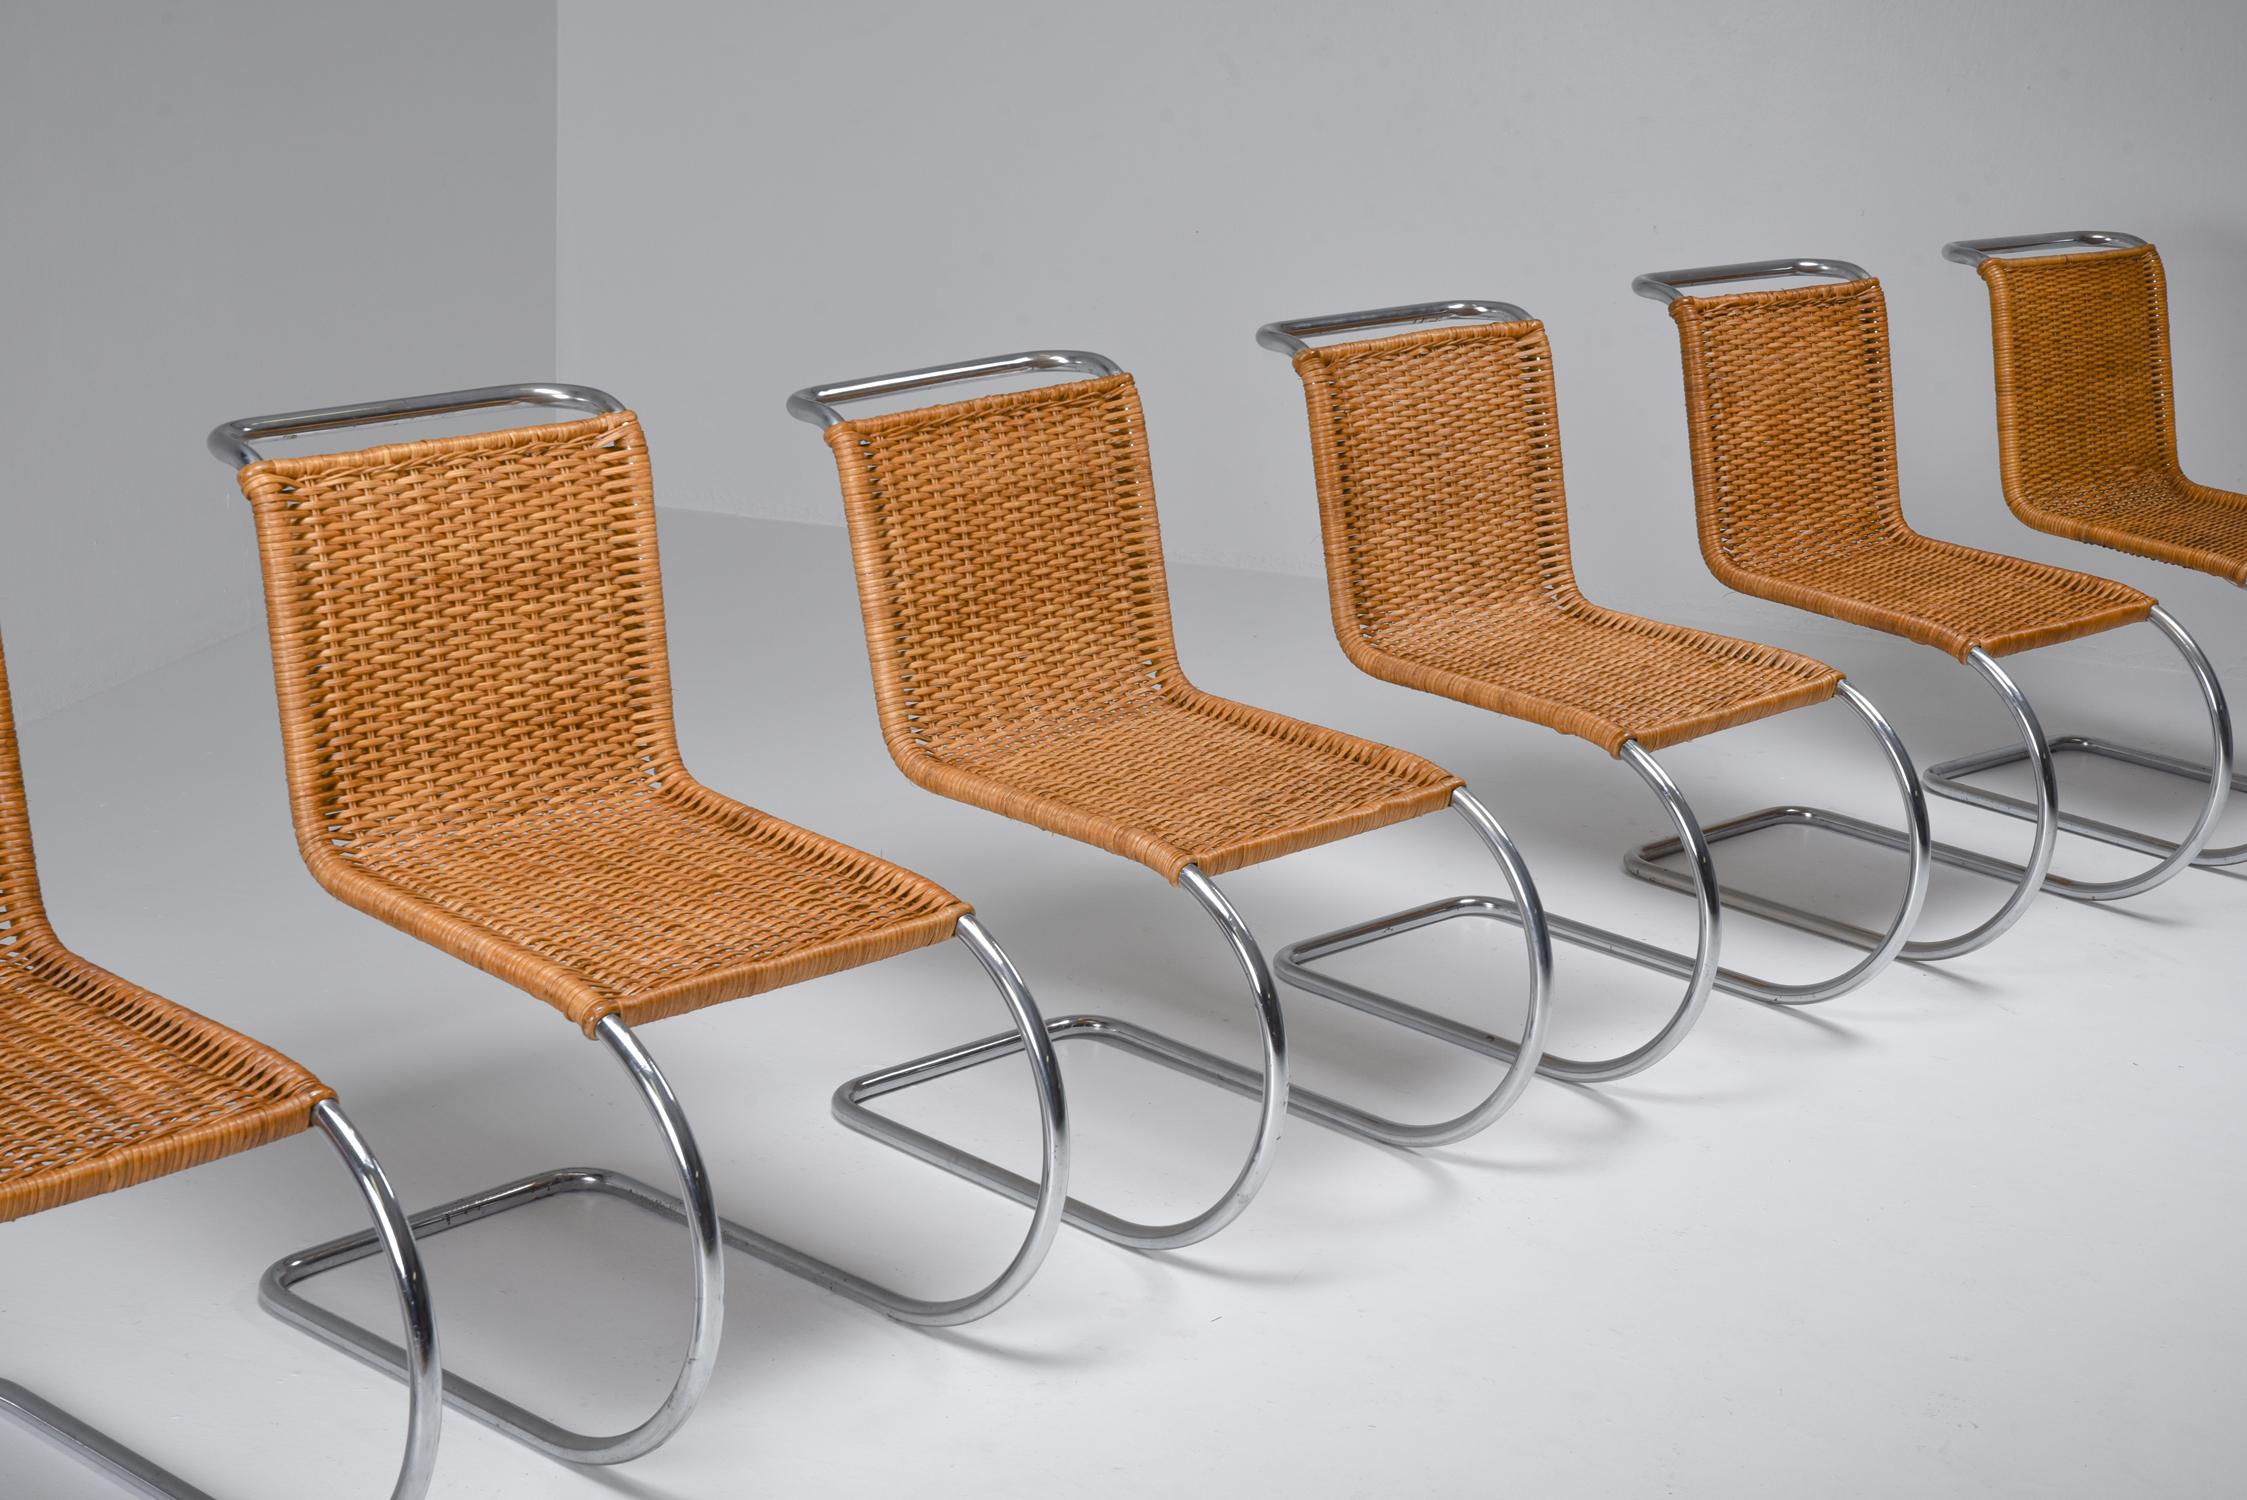 Marcel Breuer dining chairs Mid-Century Modern;
Chromed metal and rattan armchair by Marcel Breuer for Thonet.

Marcel Lajos Breuer (21 May 1902-1 July 1981), was a Hungarian-born modernist architect, and furniture designer. At the Bauhaus he